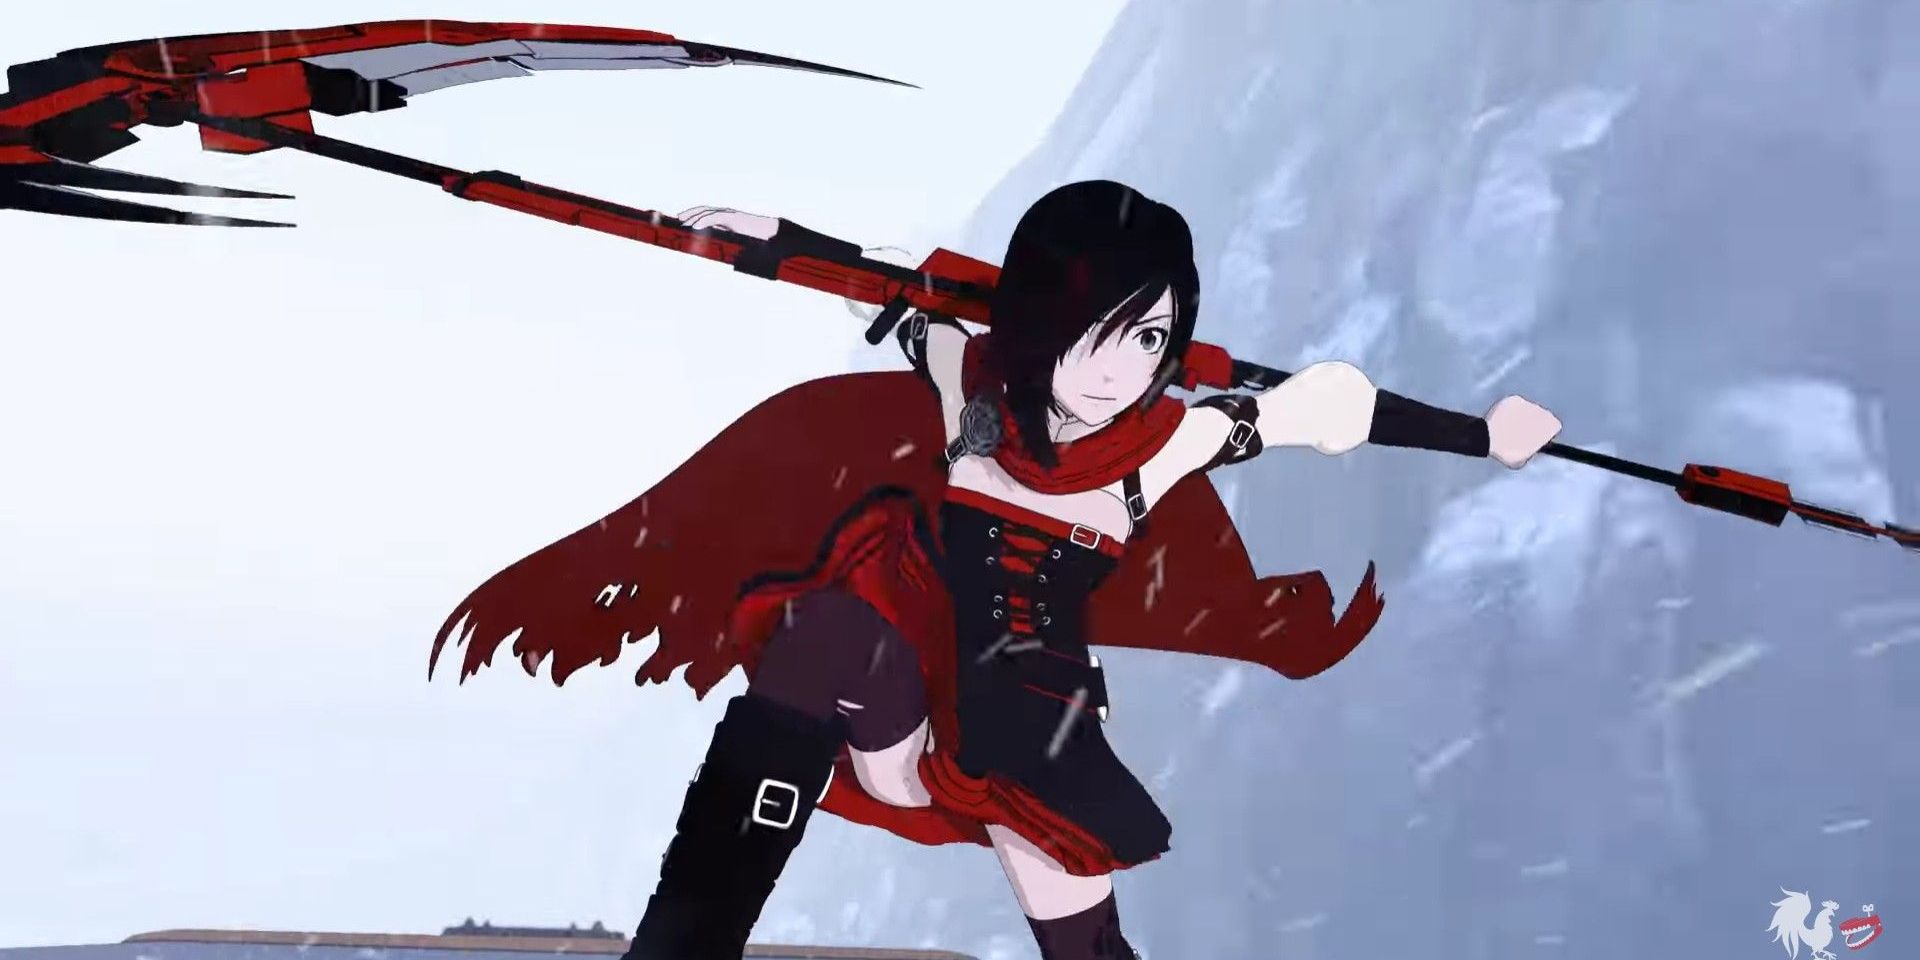 Ruby Rose wielding Crescent Rose in RWBY Anime